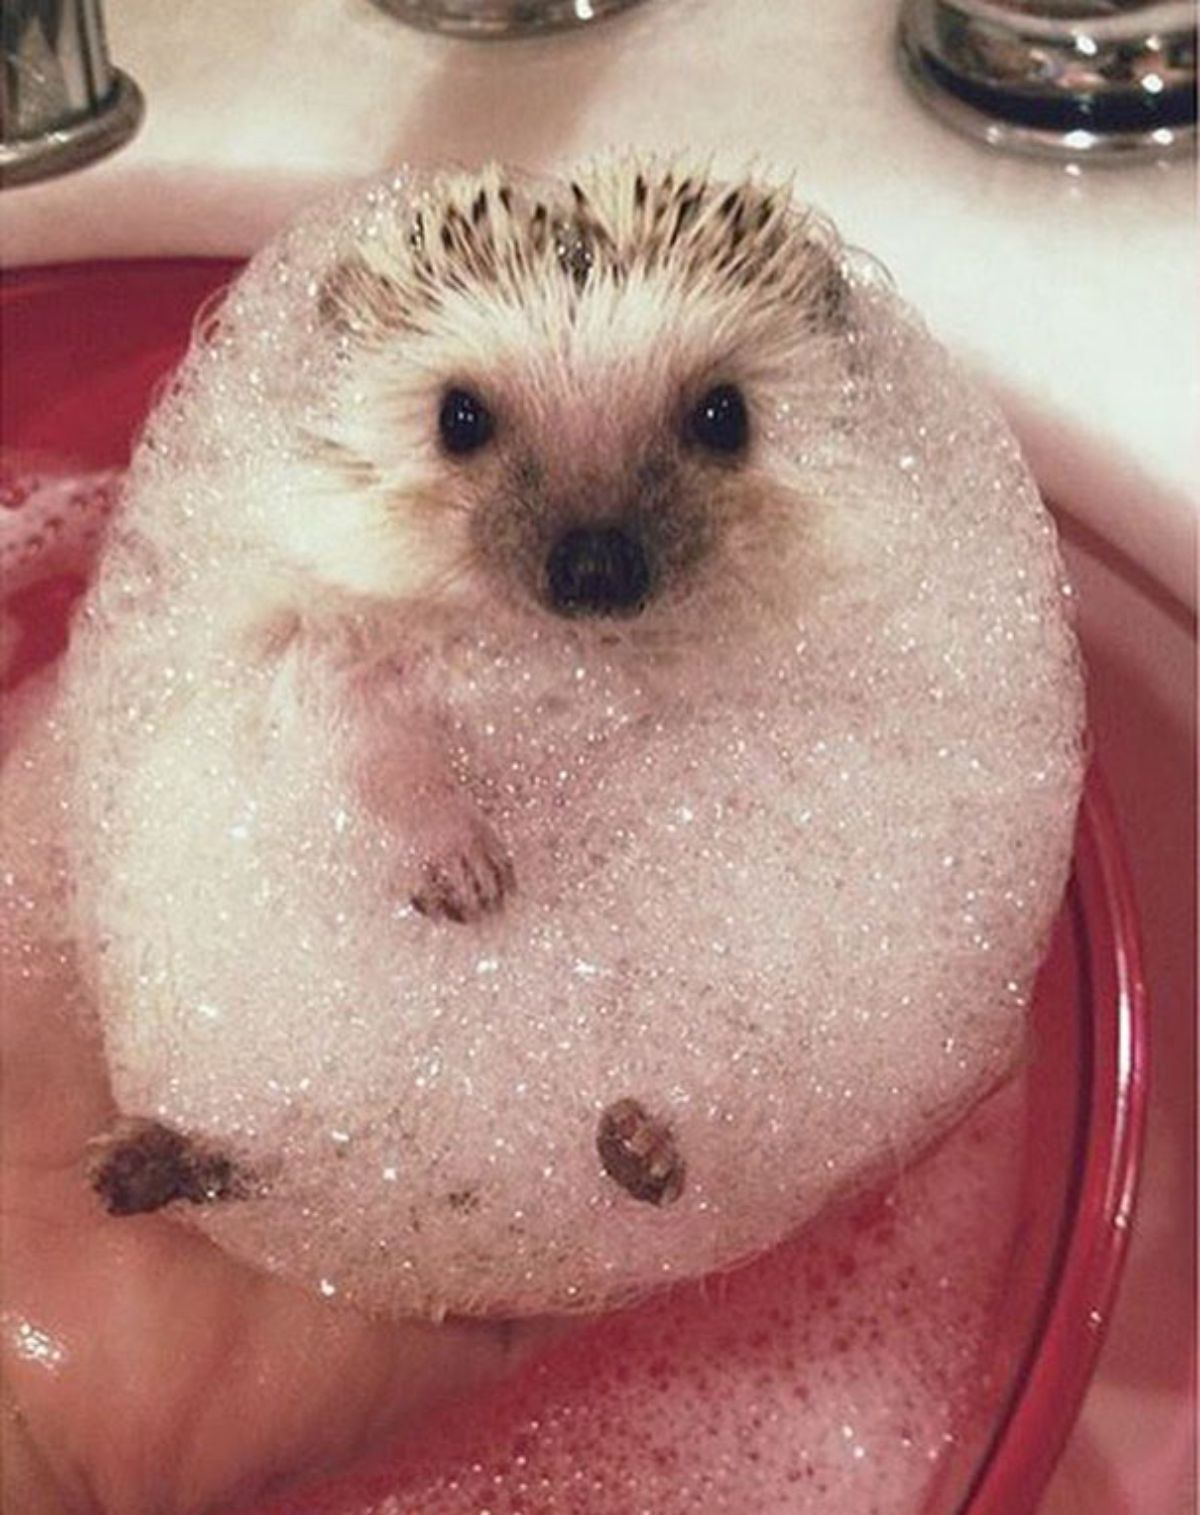 hedgehog belly up in a red basin covered in soap suds